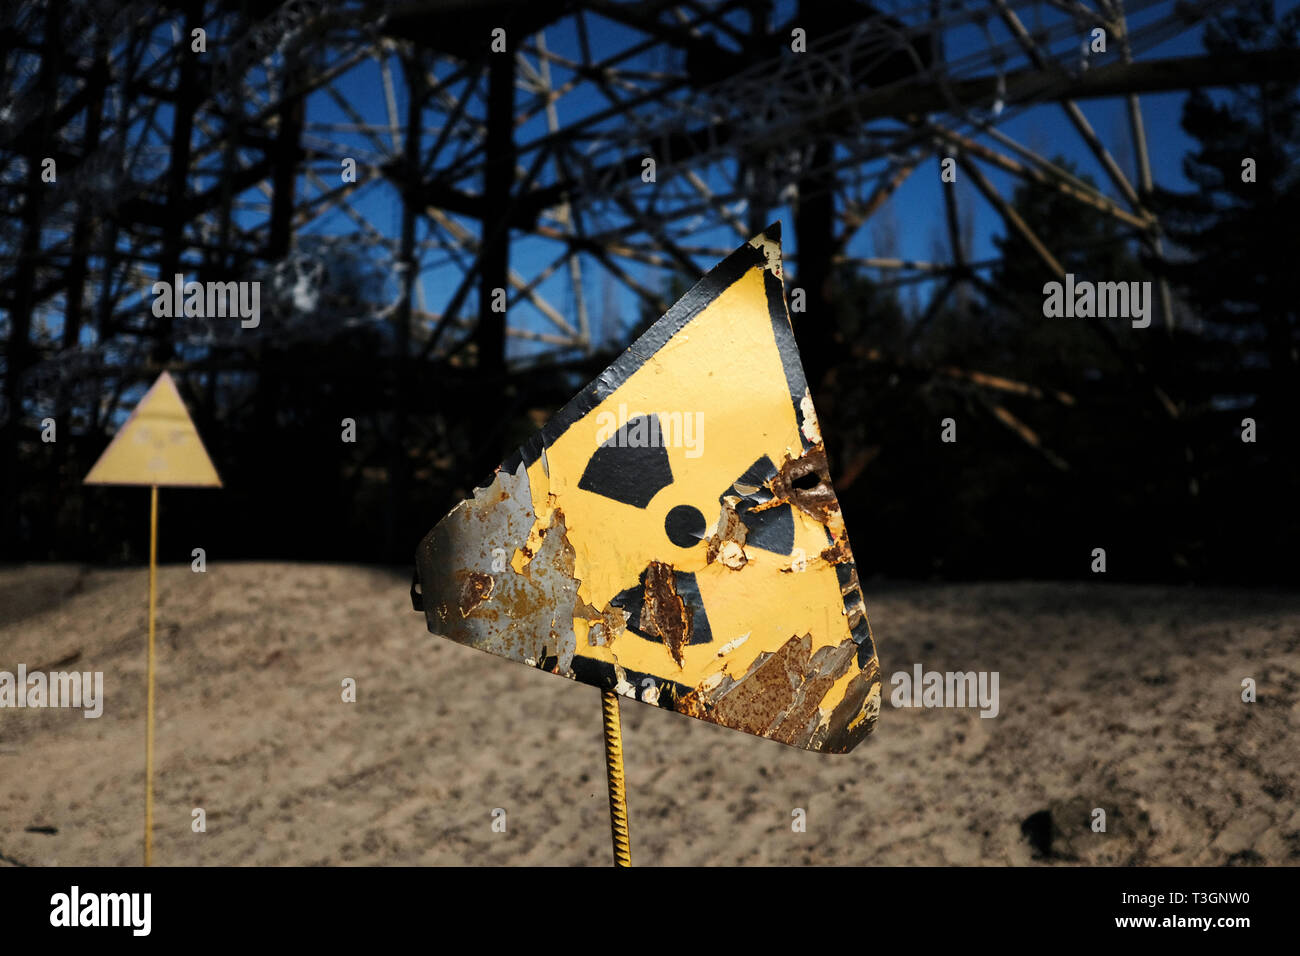 Radiation warning sign in the Chernobyl exclusion zone, Ukraine, April 2019 Stock Photo